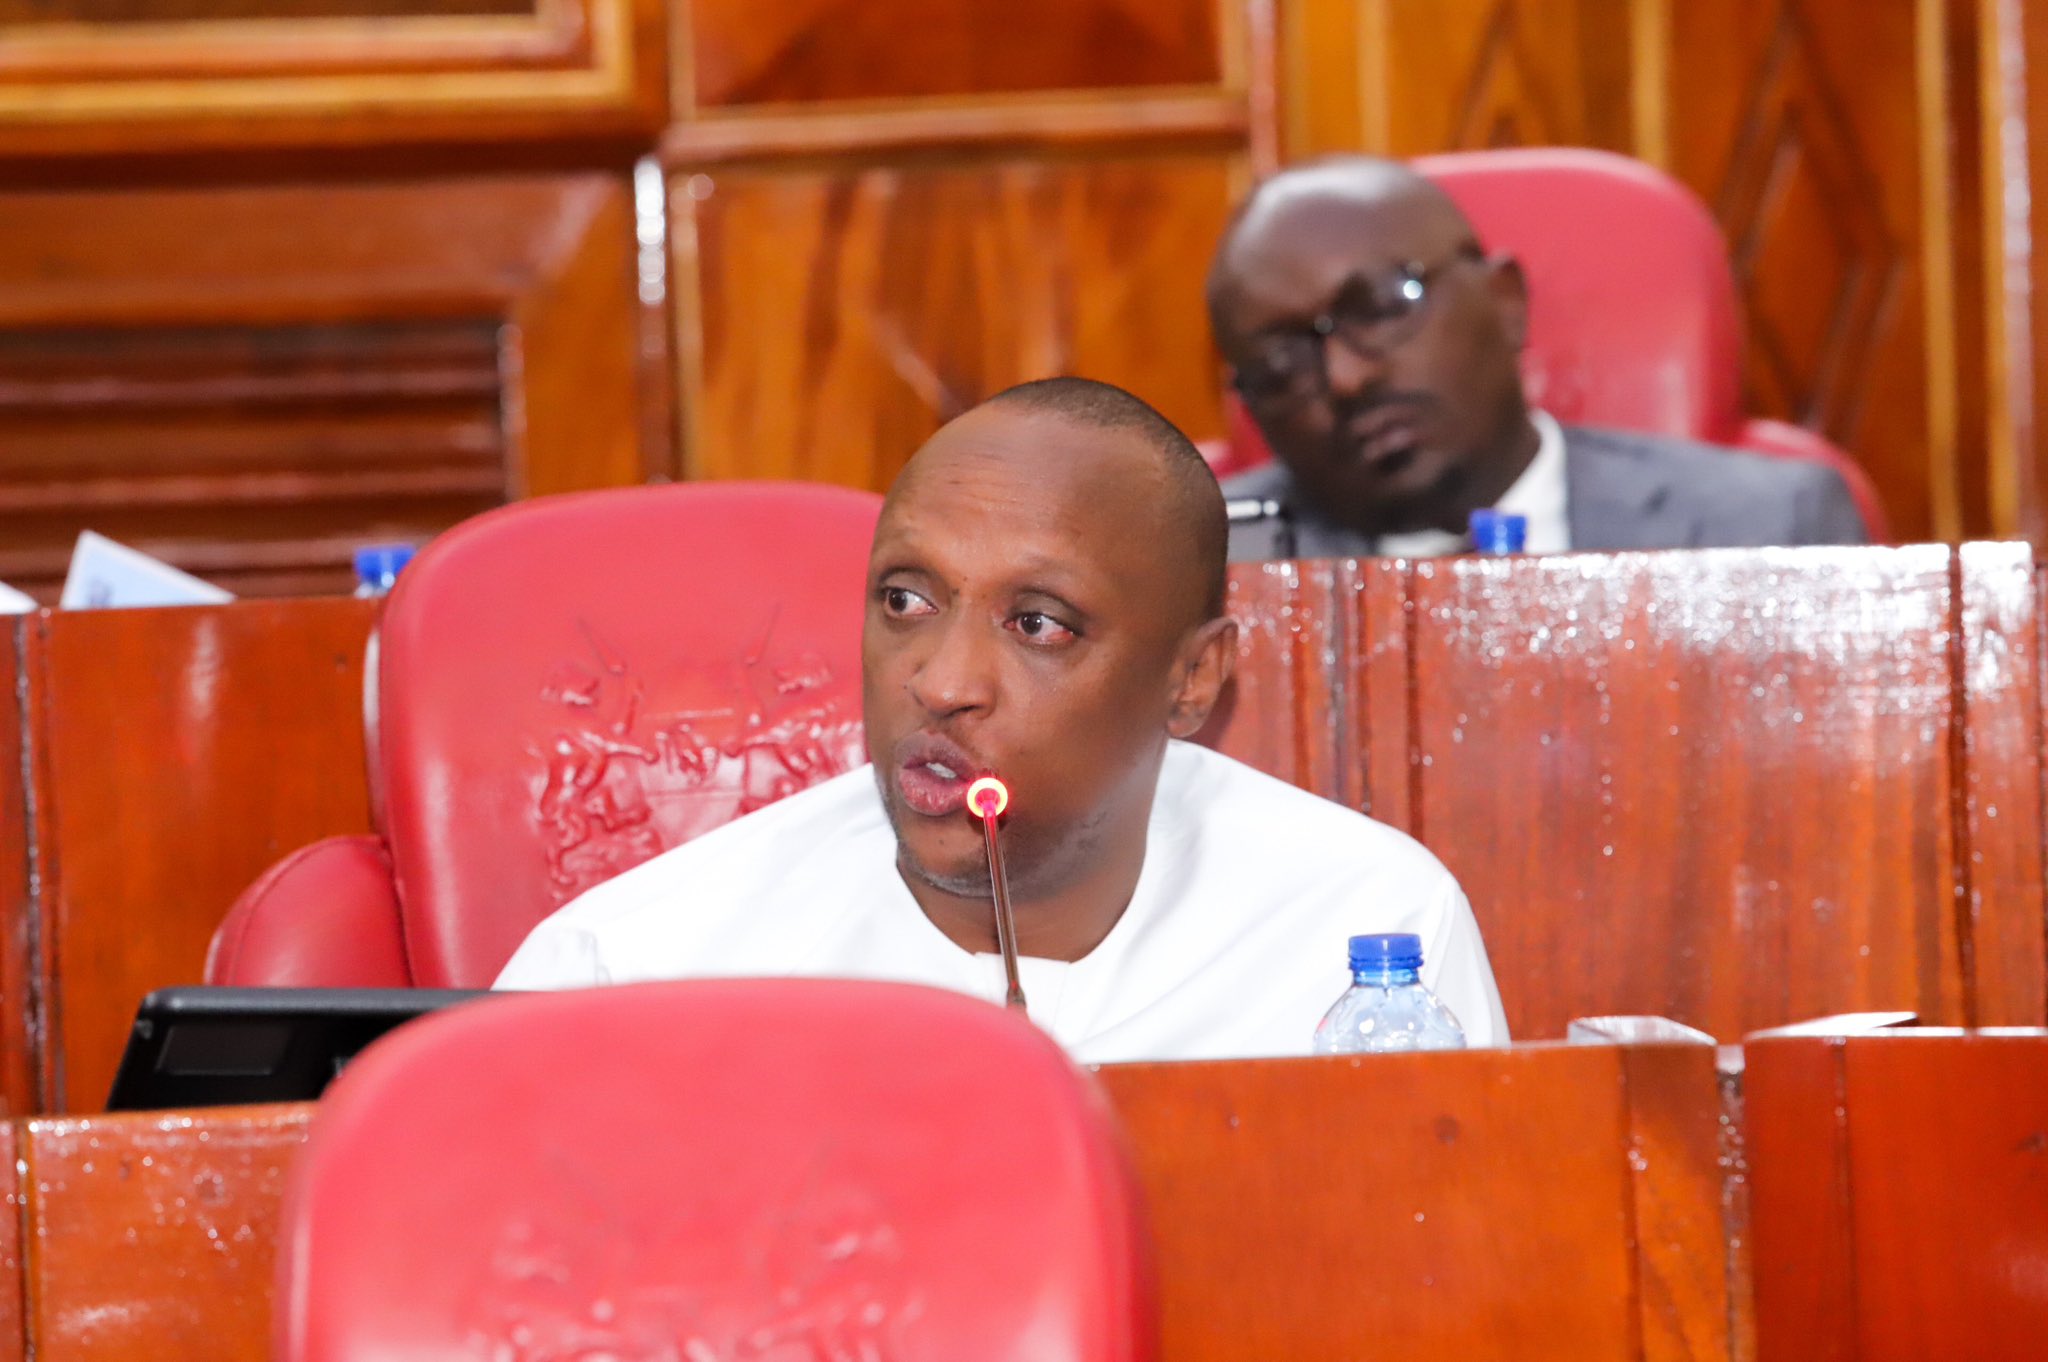 Isiolo Governor fined Sh500,000 for snubbing Senate Committee over audit queries